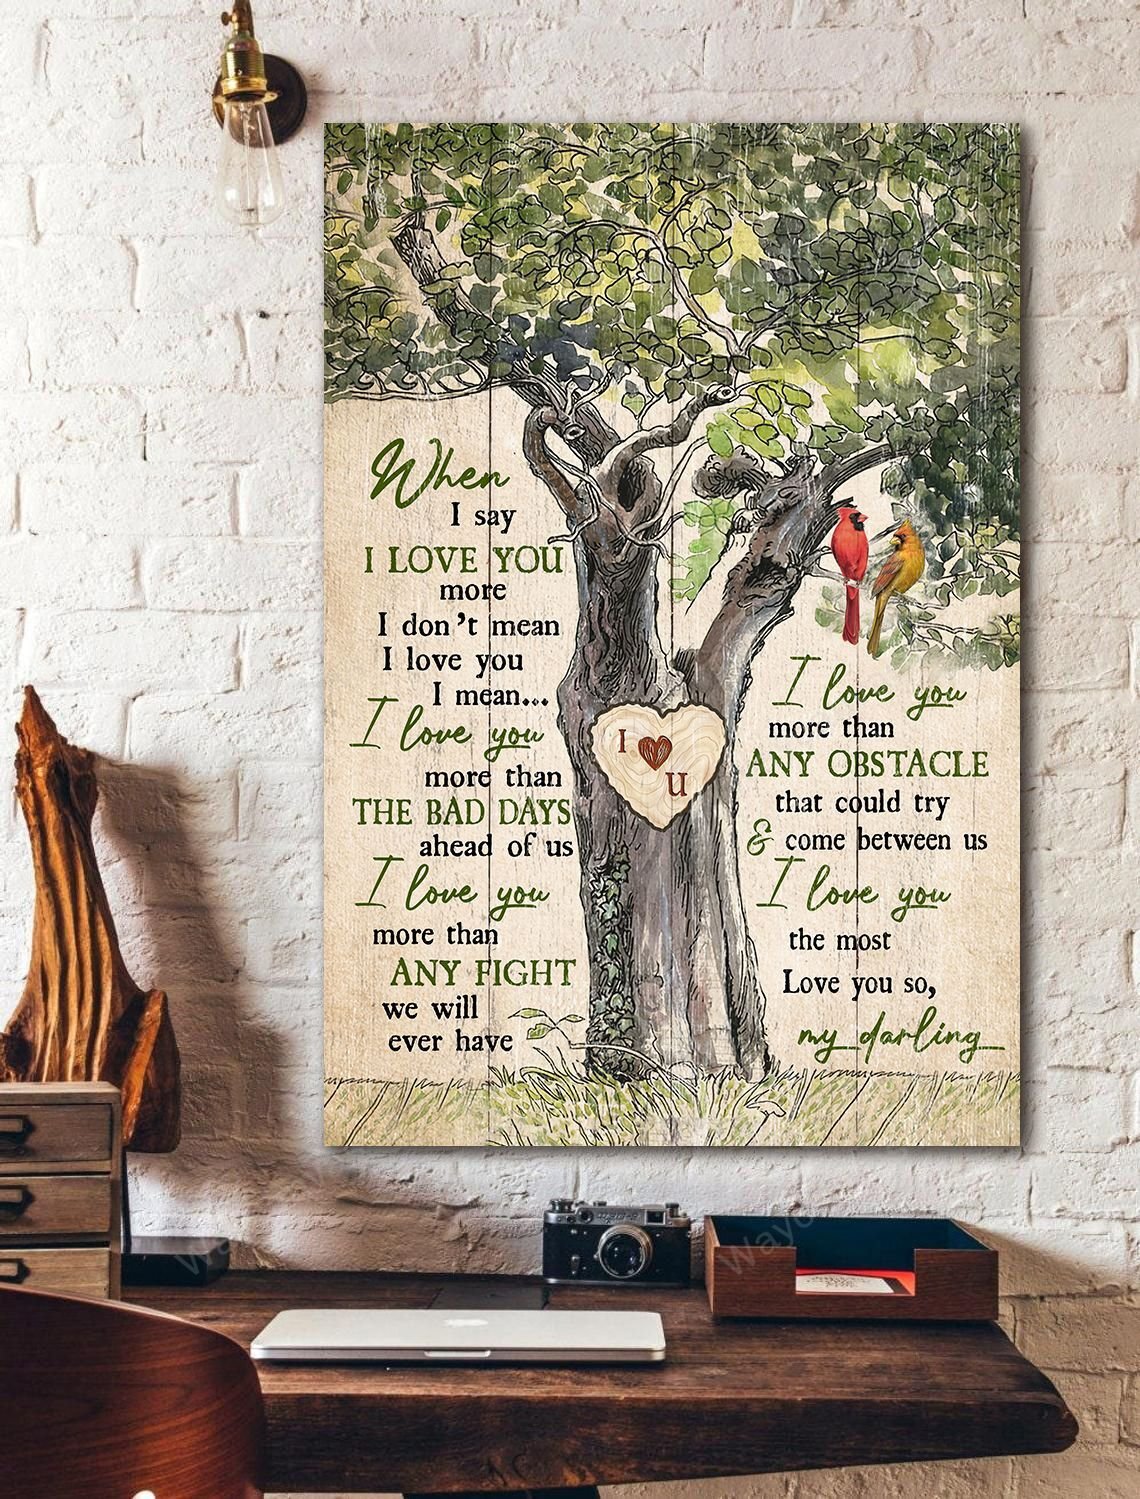 Green tree, Wooden heart, Red cardinal, When I say I love you more - Couple Portrait Canvas Prints, Wall Art